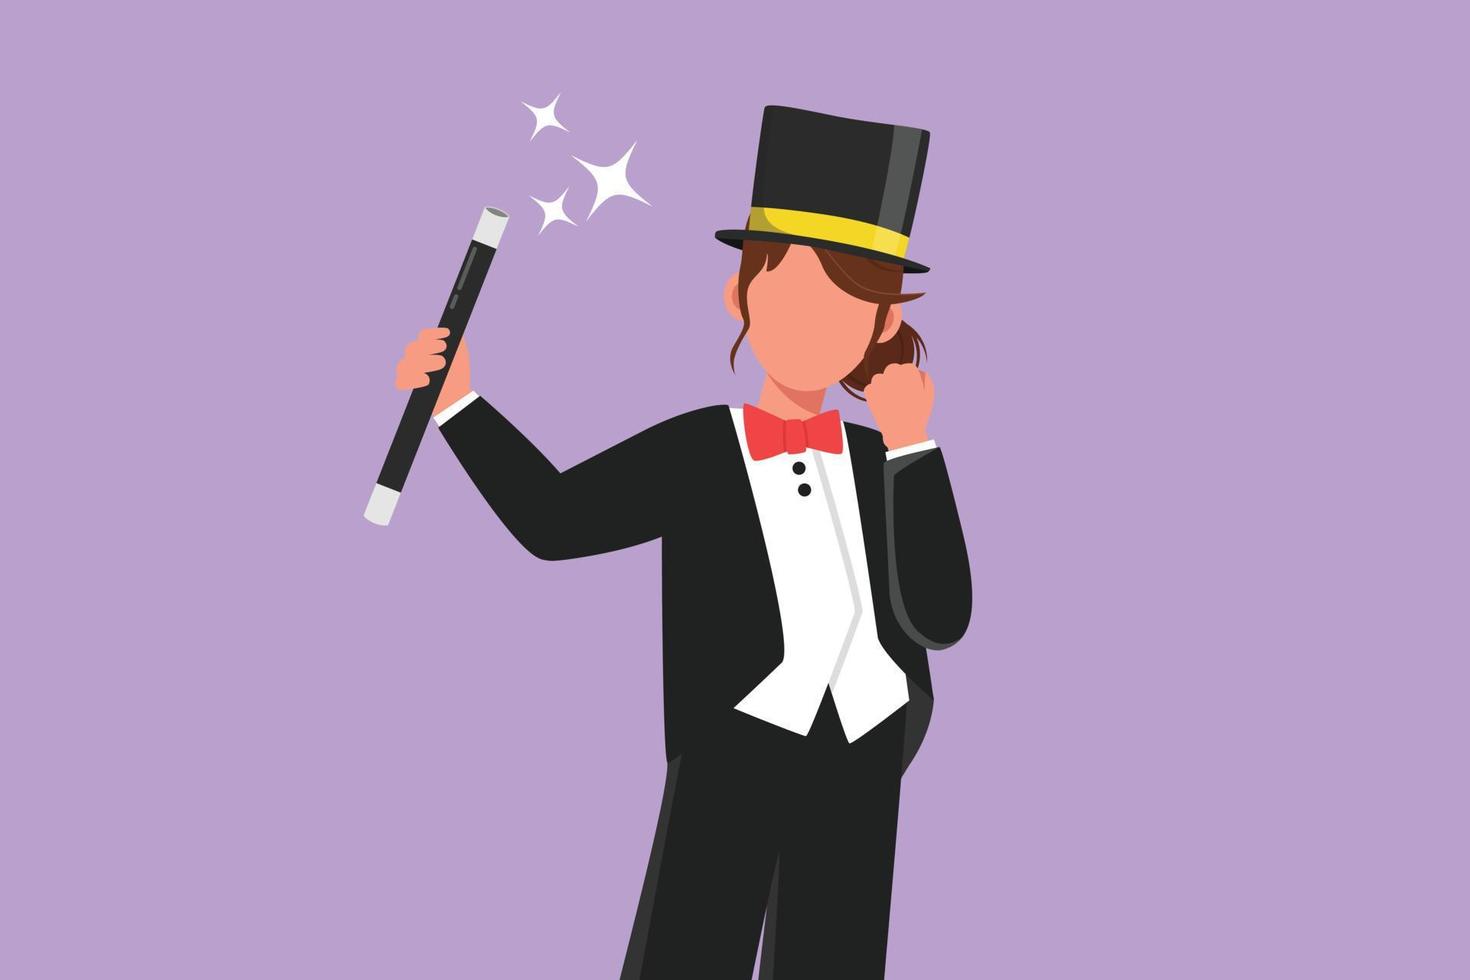 Character flat drawing beauty female magician in tuxedo suit with celebrate gesture wearing hat and holding magic stick ready to entertain audience in circus show. Cartoon design vector illustration